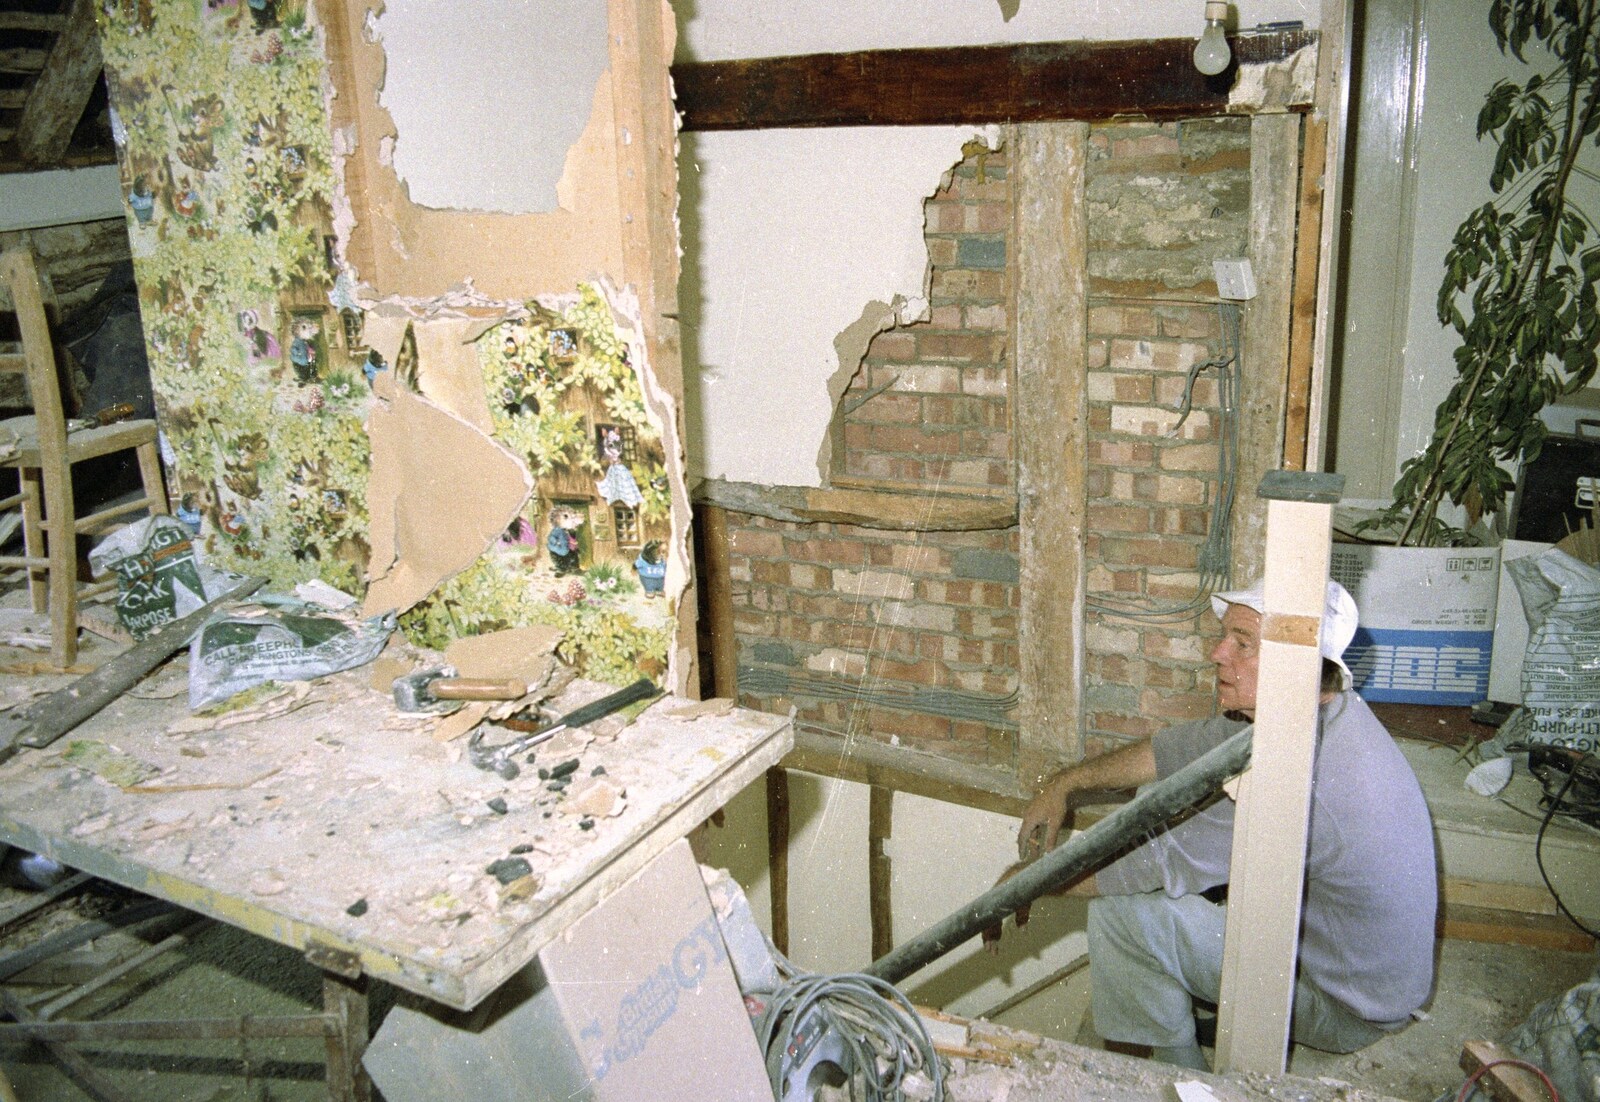 The Old Man takes a break on the stairs from Hale-Bopp and Bedroom Demolition, Brome, Suffolk - 10th May 1997